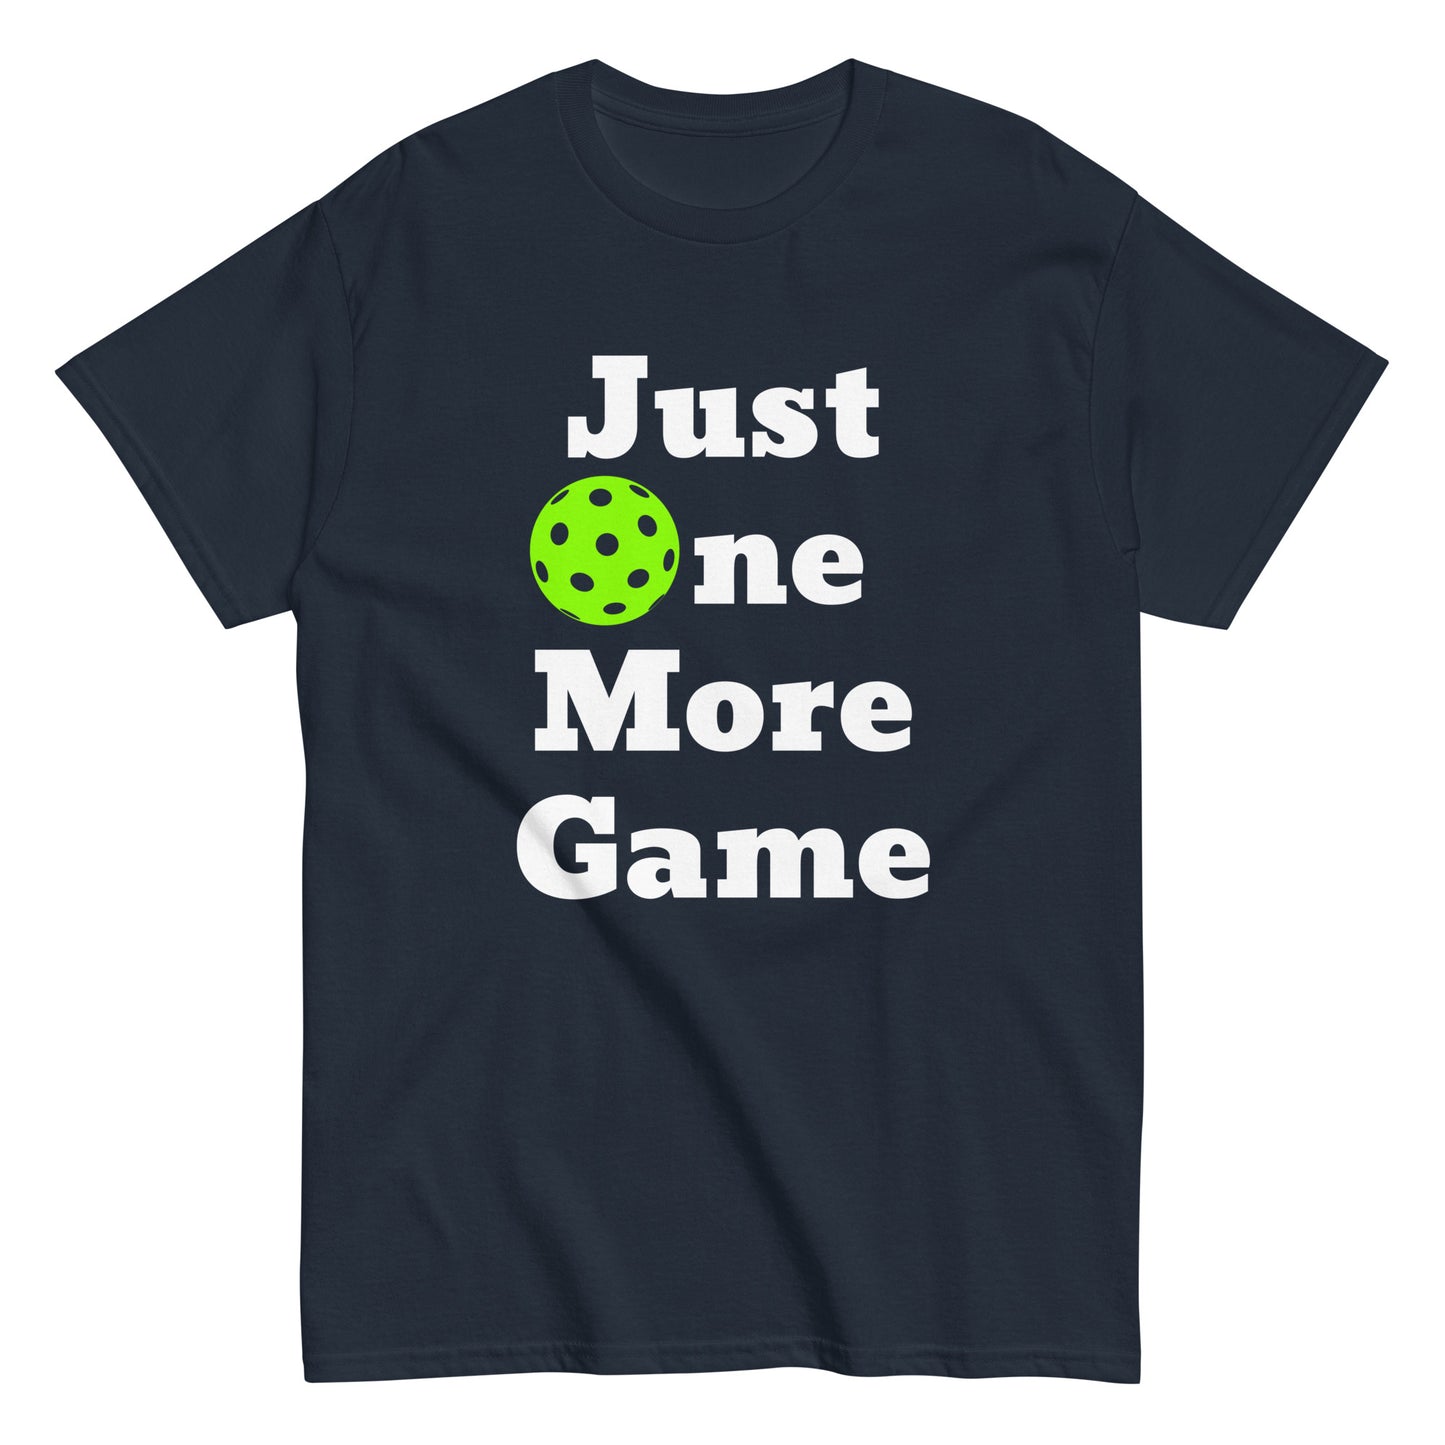 One More Game - Men's classic tee